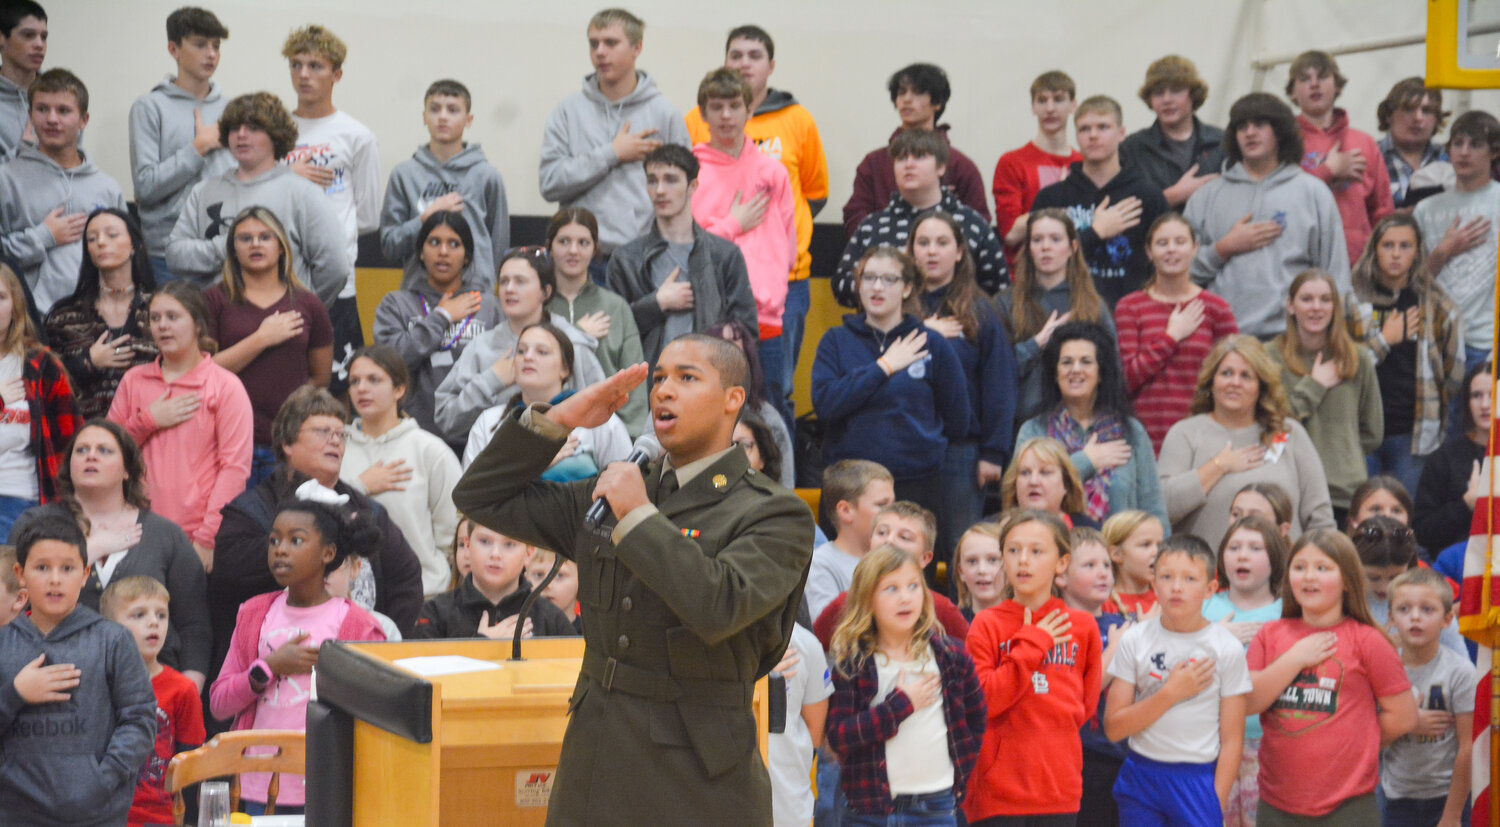 Vienna High School student Darius McCoy Bennett led the Maries R-1 assembly in the Pledge of Allegiance.